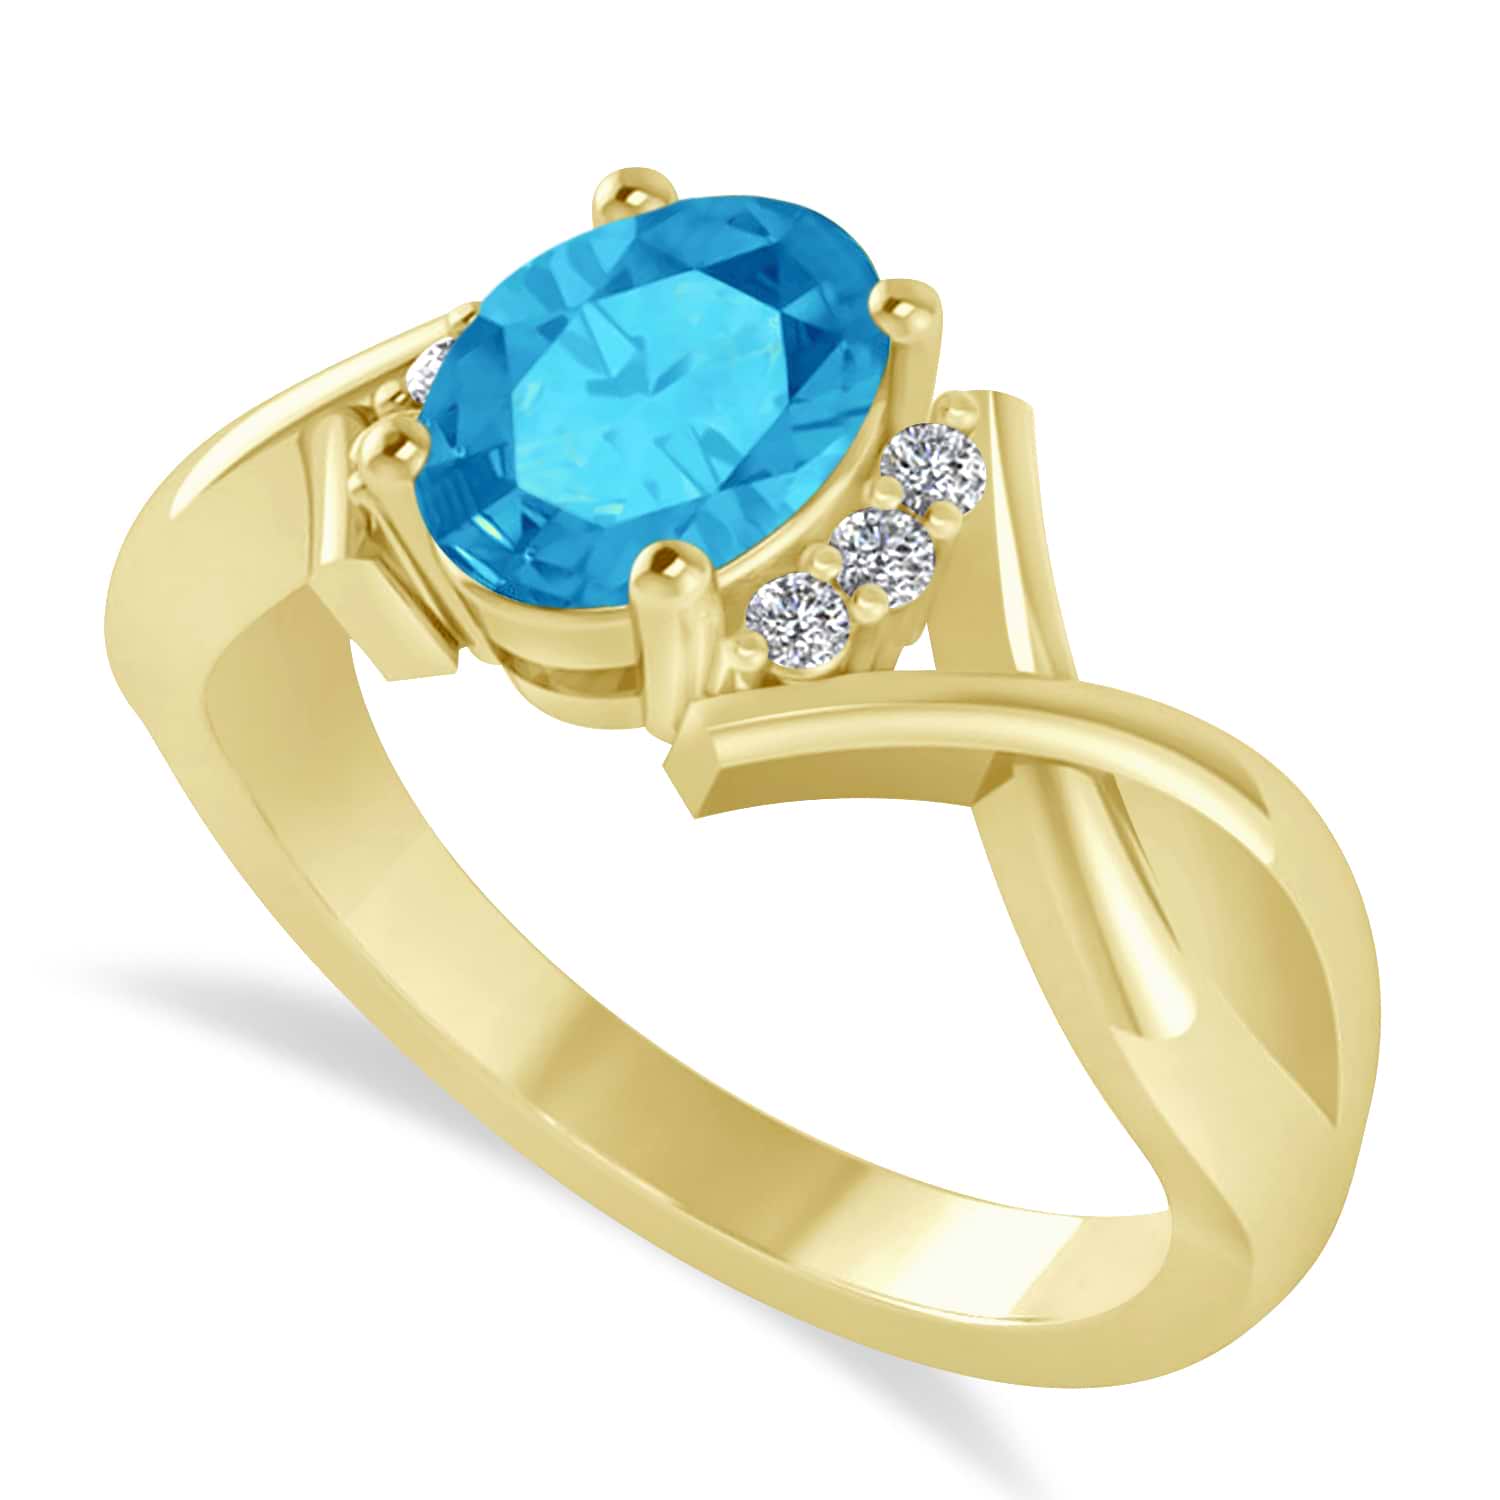 Oval Cut Blue Topaz & Diamond Engagement Ring With Split Shank 14k Yellow Gold (1.69ct)